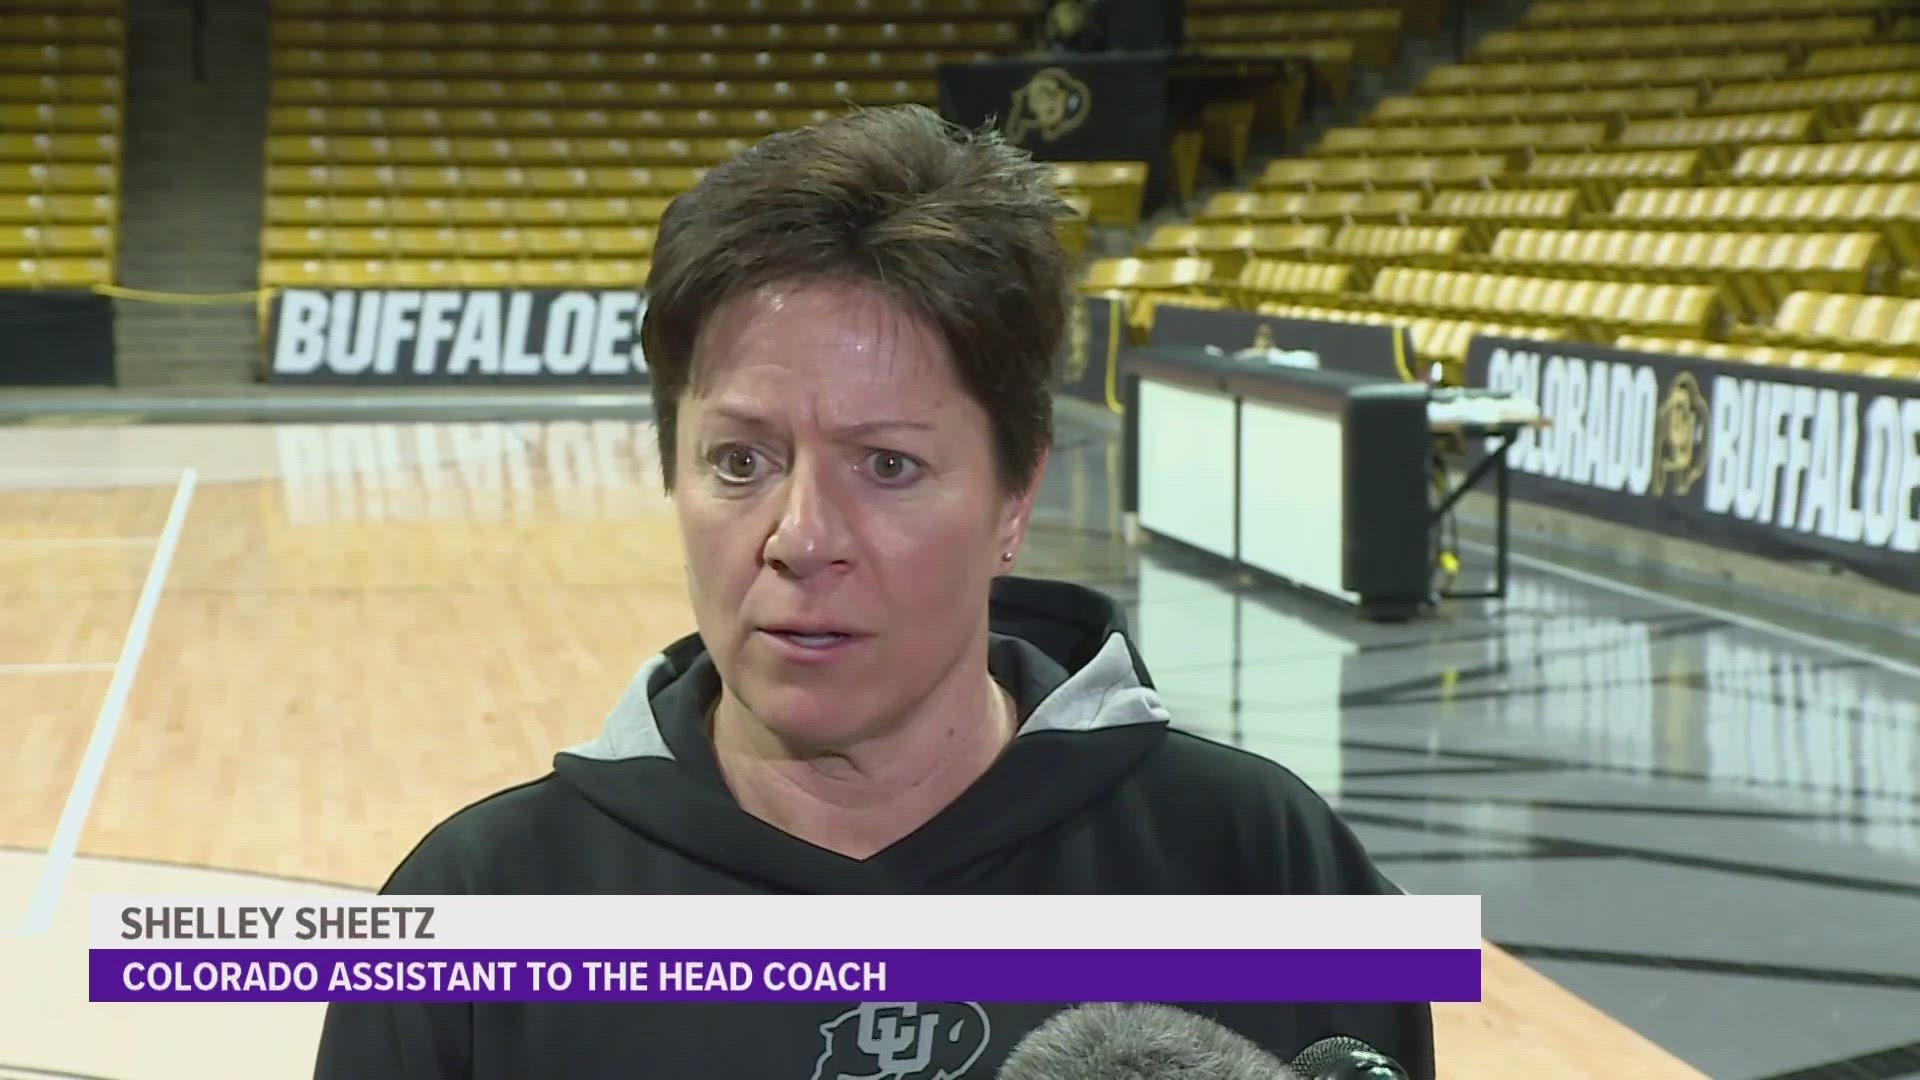 Cedar Rapids native and current Colorado Buffaloes coaching staff member Shelley Sheetz talked about her Iowa roots and the Sweet 16 game taking place tonight.